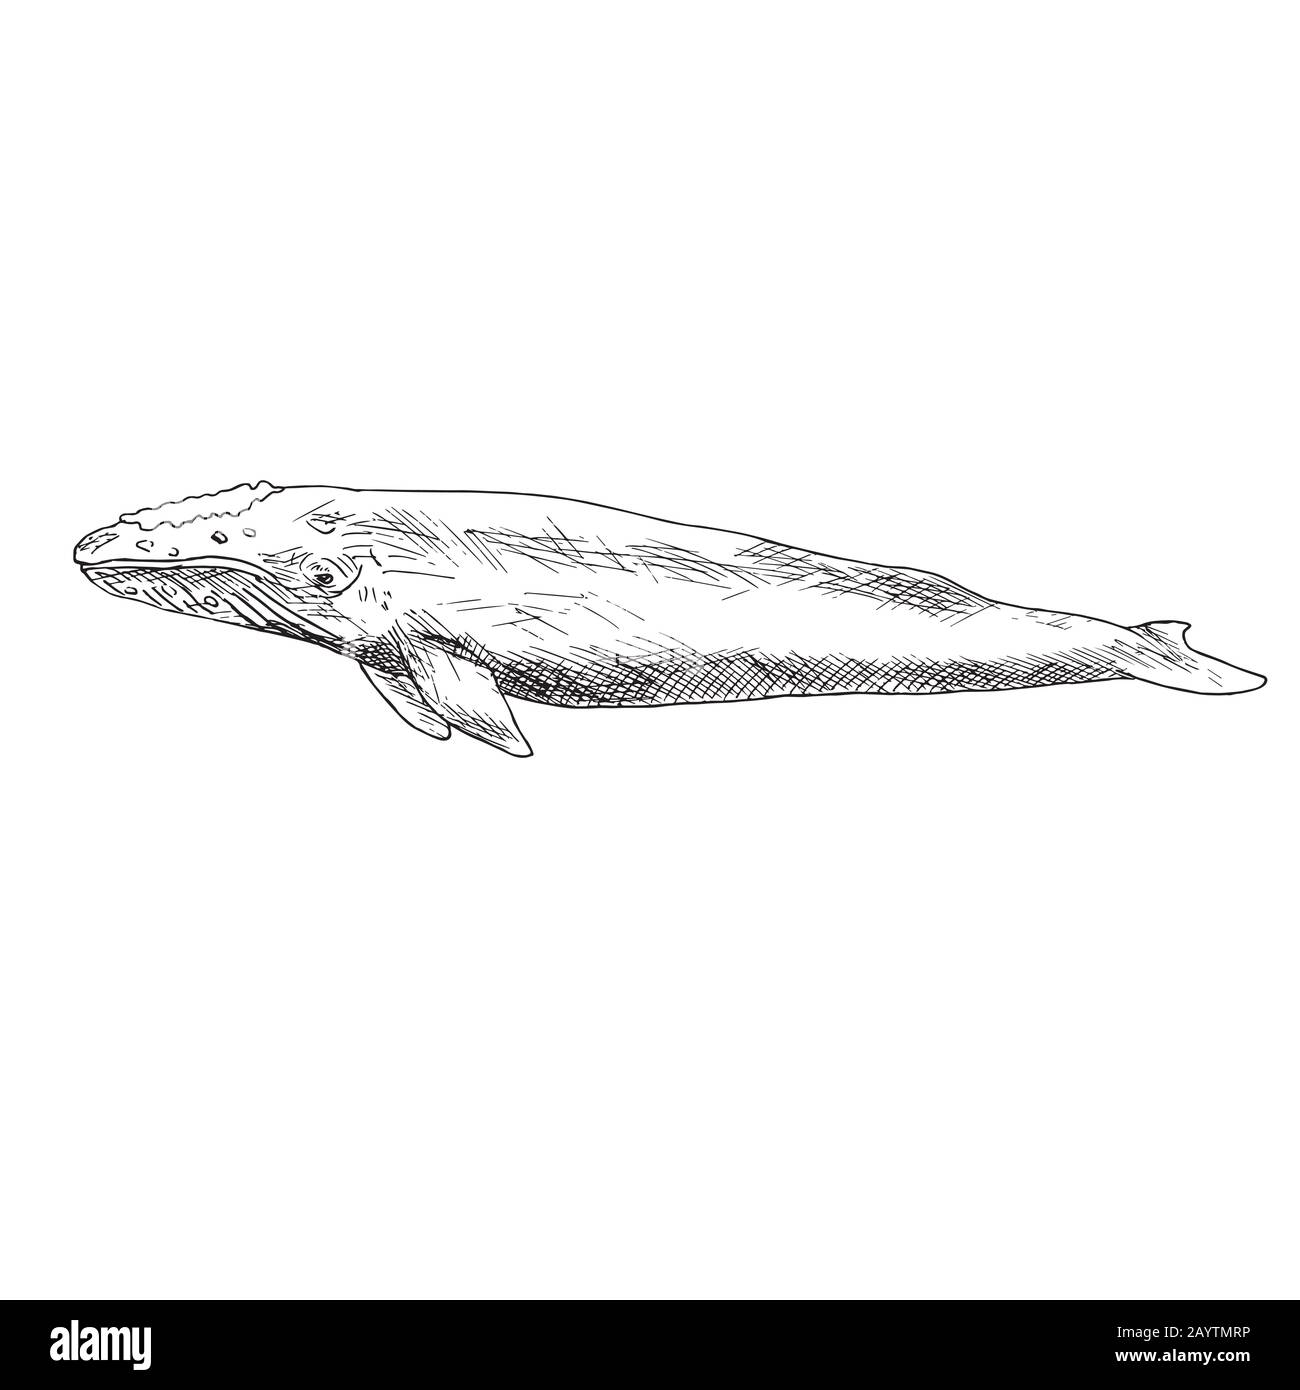 Humpback Whale Pencil drawing by Ruth Searle | Artfinder